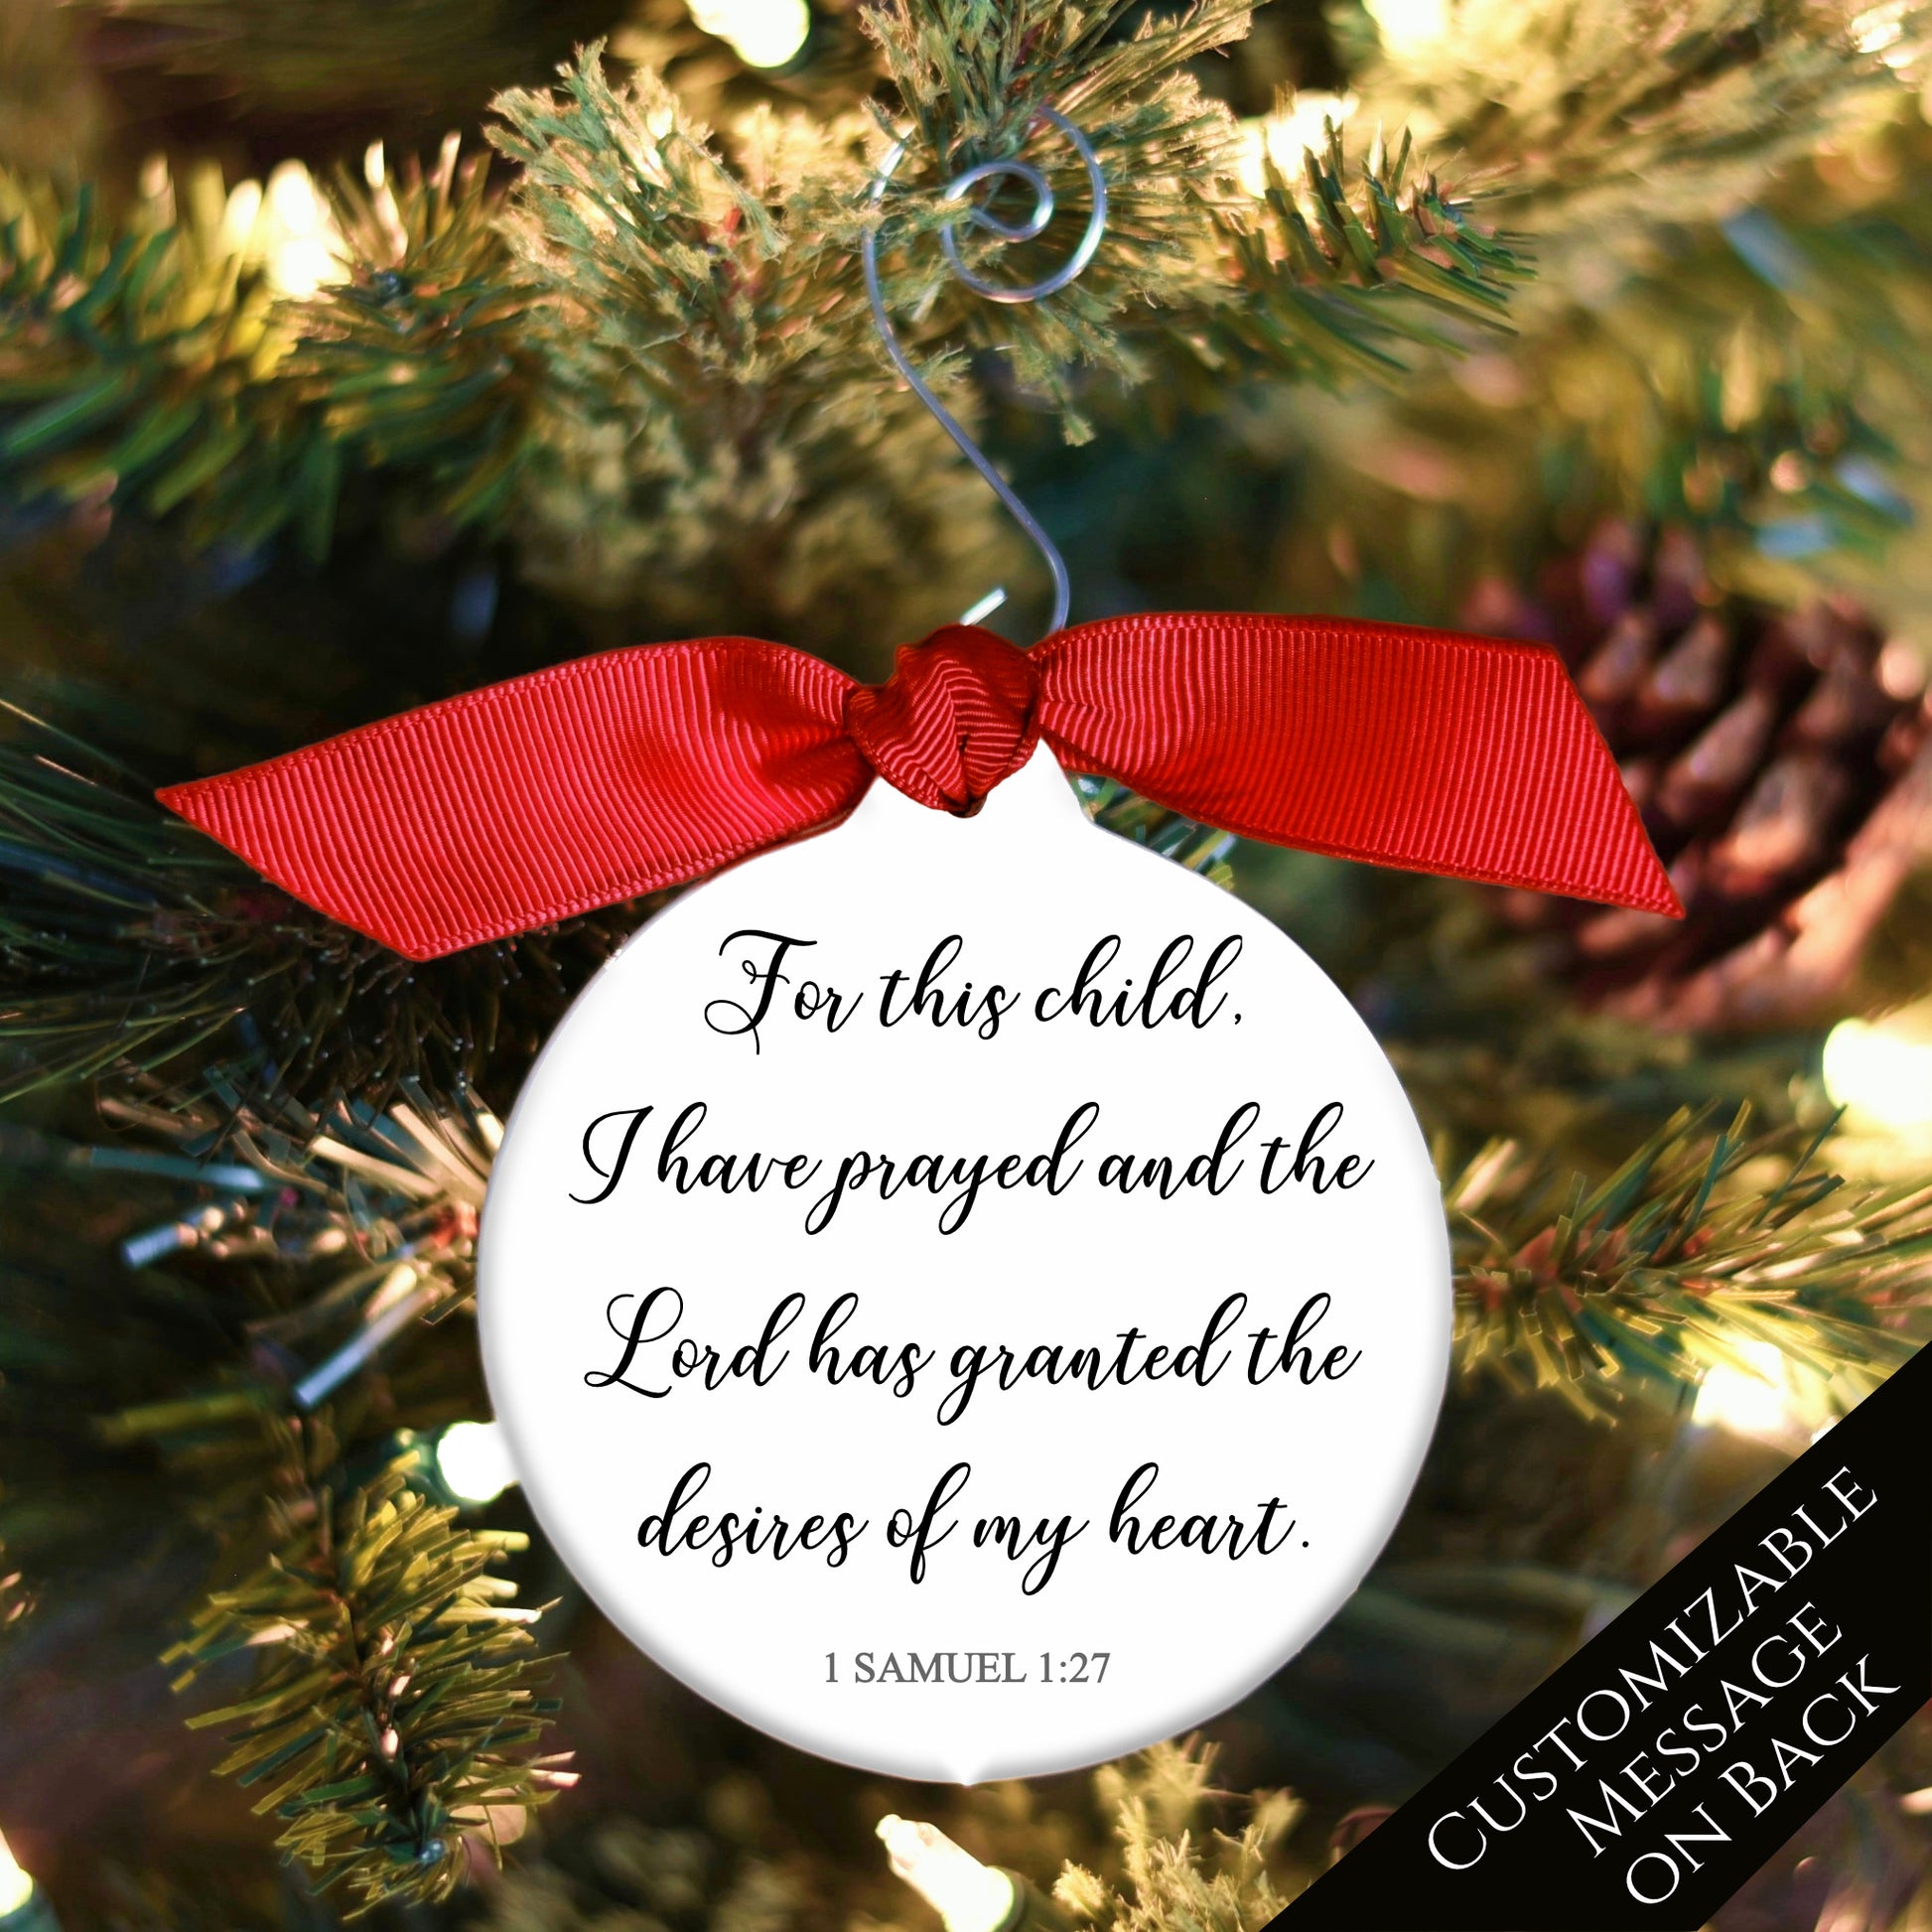 For this child, I have prayed and the Lord has granted the desires of my heart - 1 Samuel 1:27 - Christmas Ornament, Tree Decor, Christian Gift